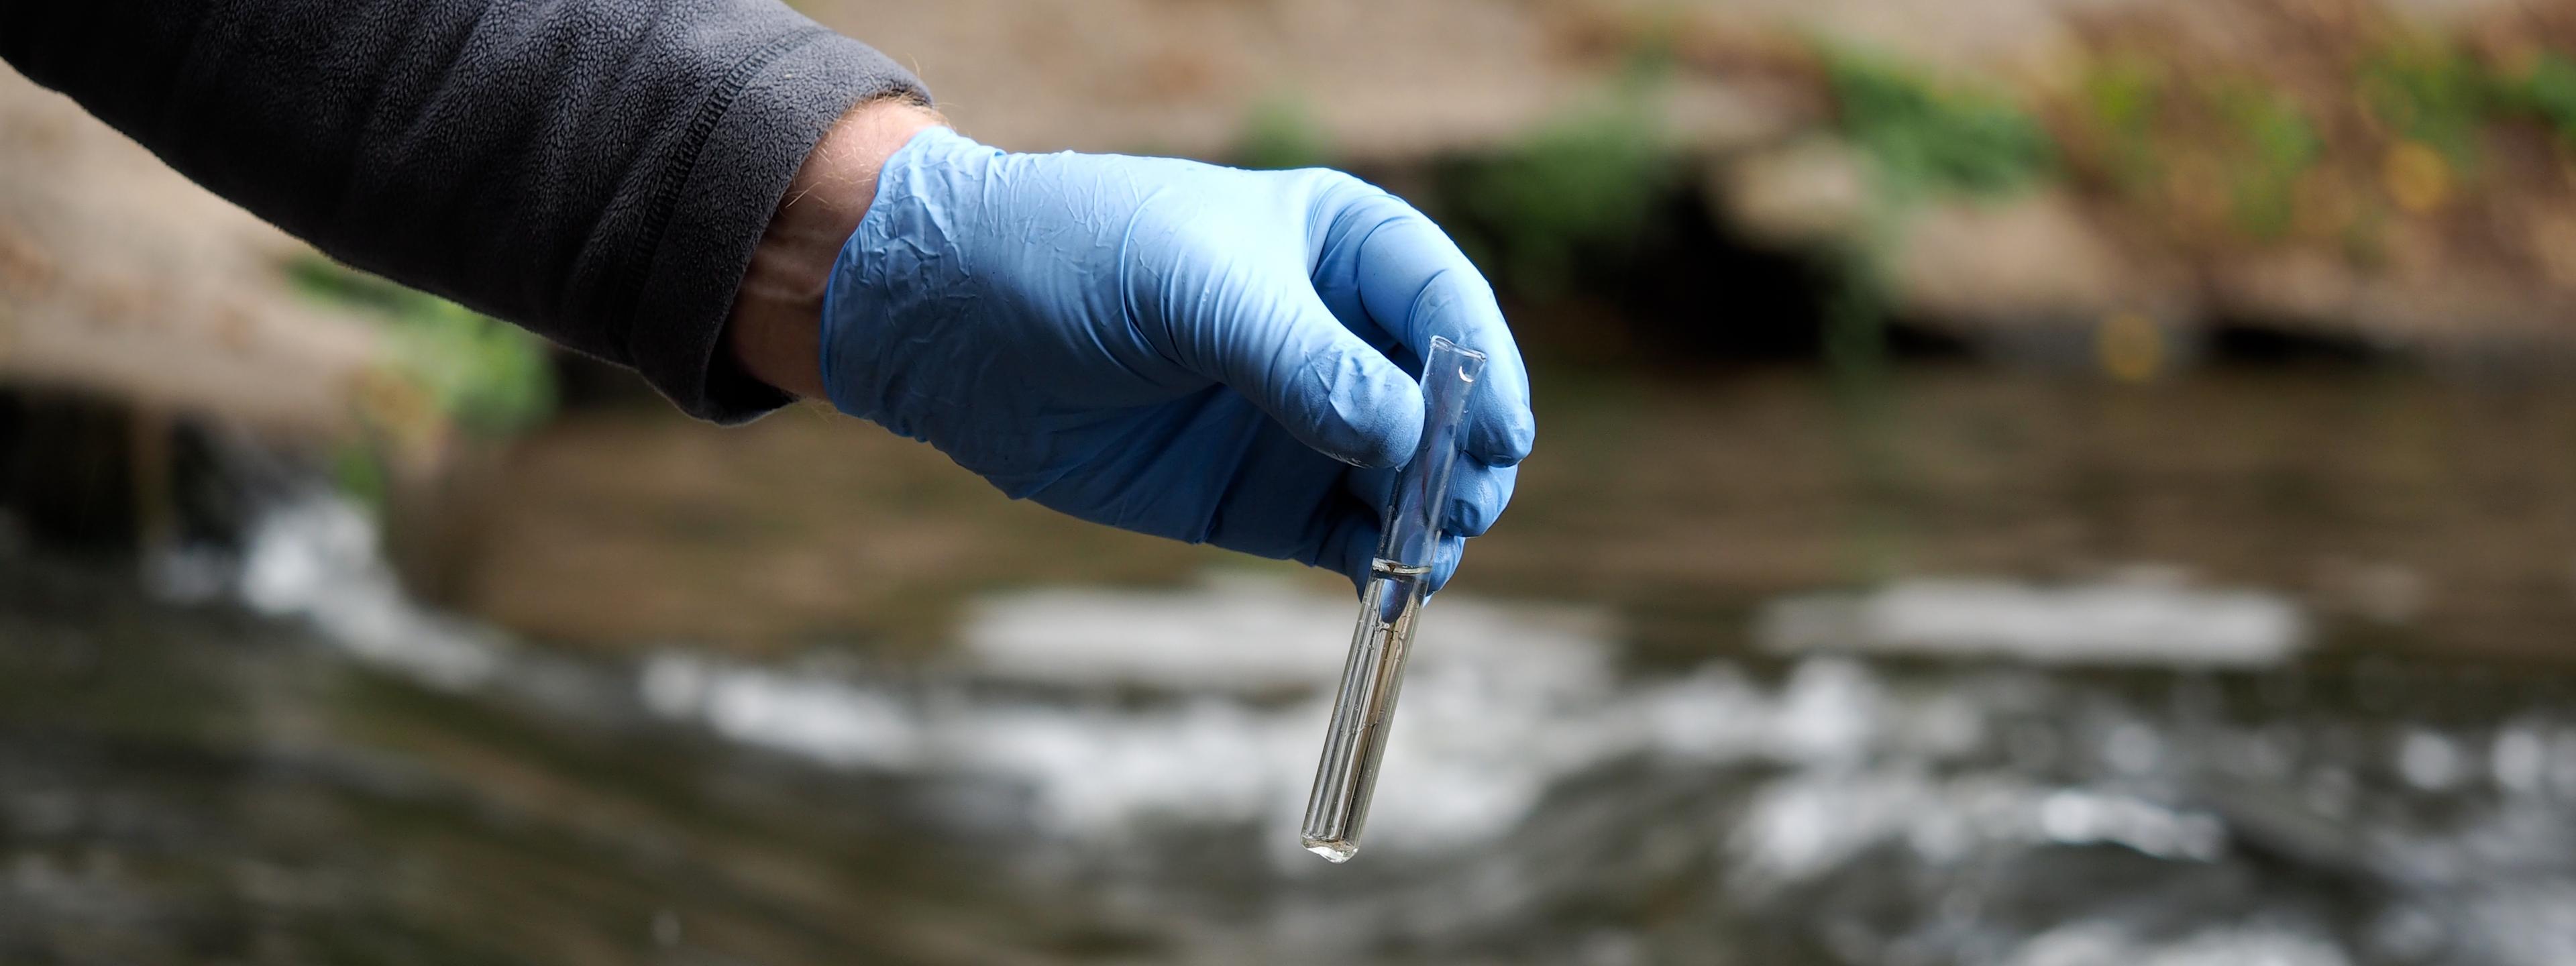 Water sample. Gloved hand into the water collecting tube. Analysis of water purity, environment, ecology - concept. Water testing for infections, harmful emissions